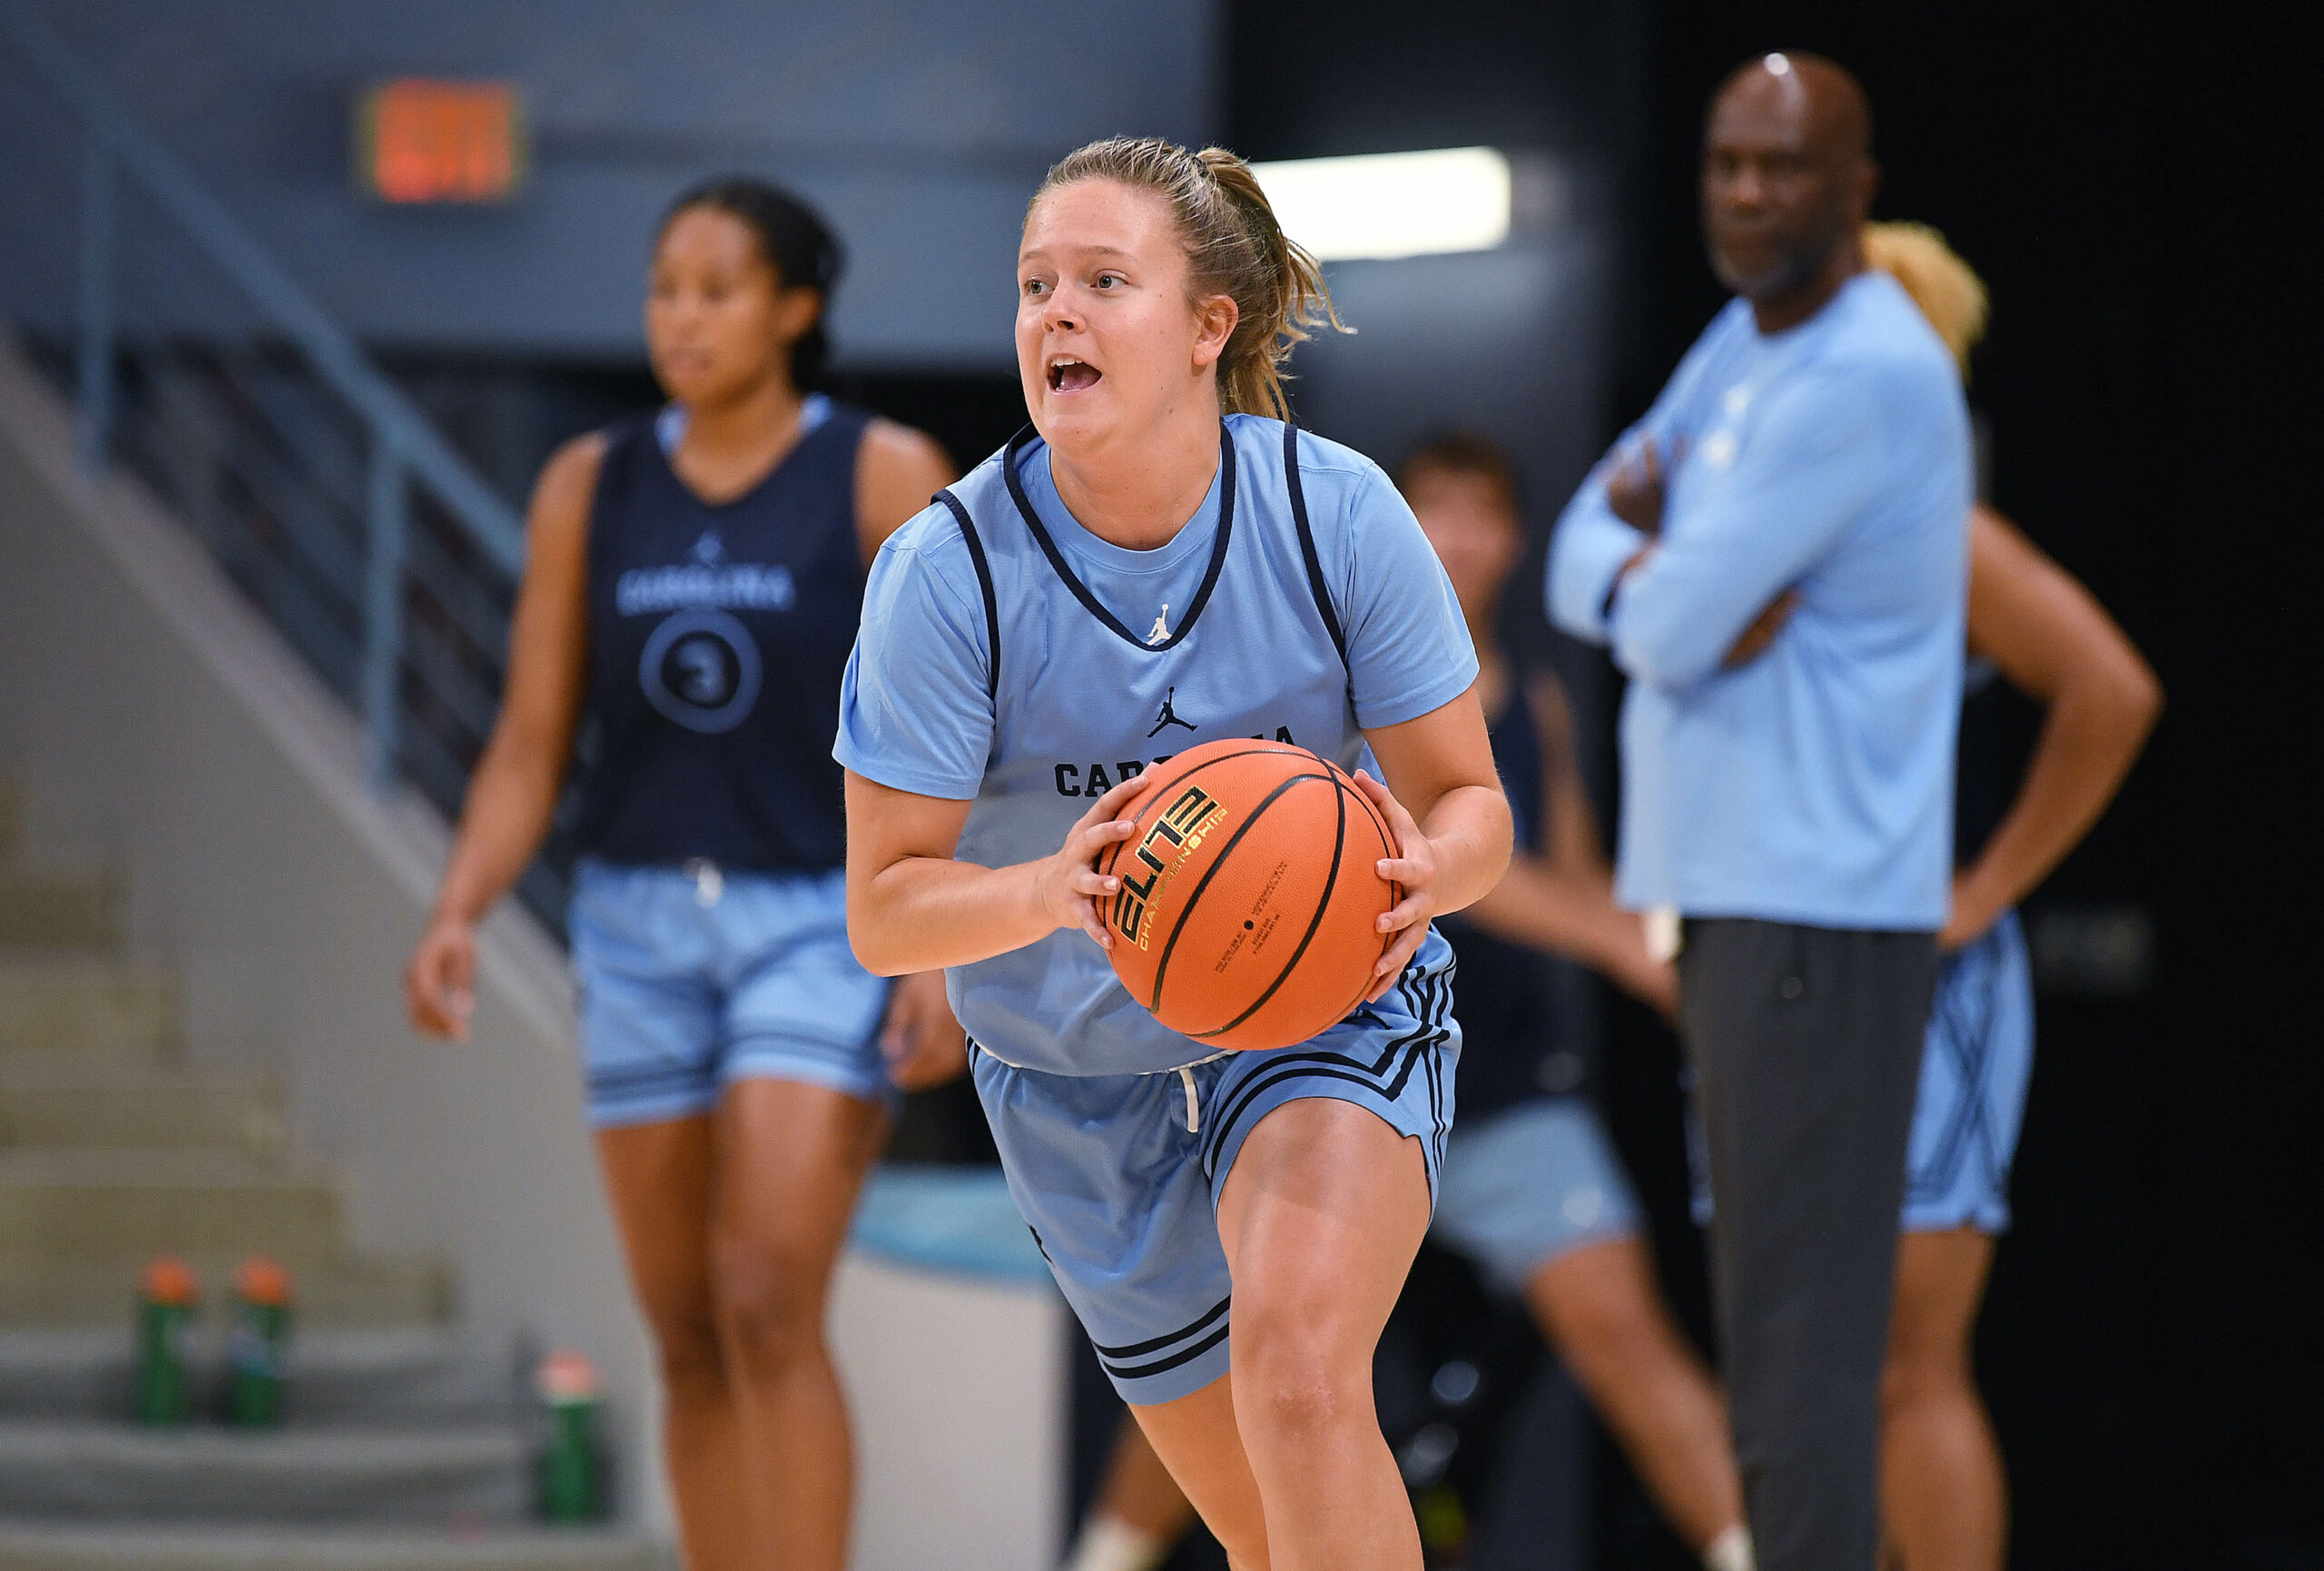 Sydney Barker Ready to Work at UNC – After Getting There The Hard Way